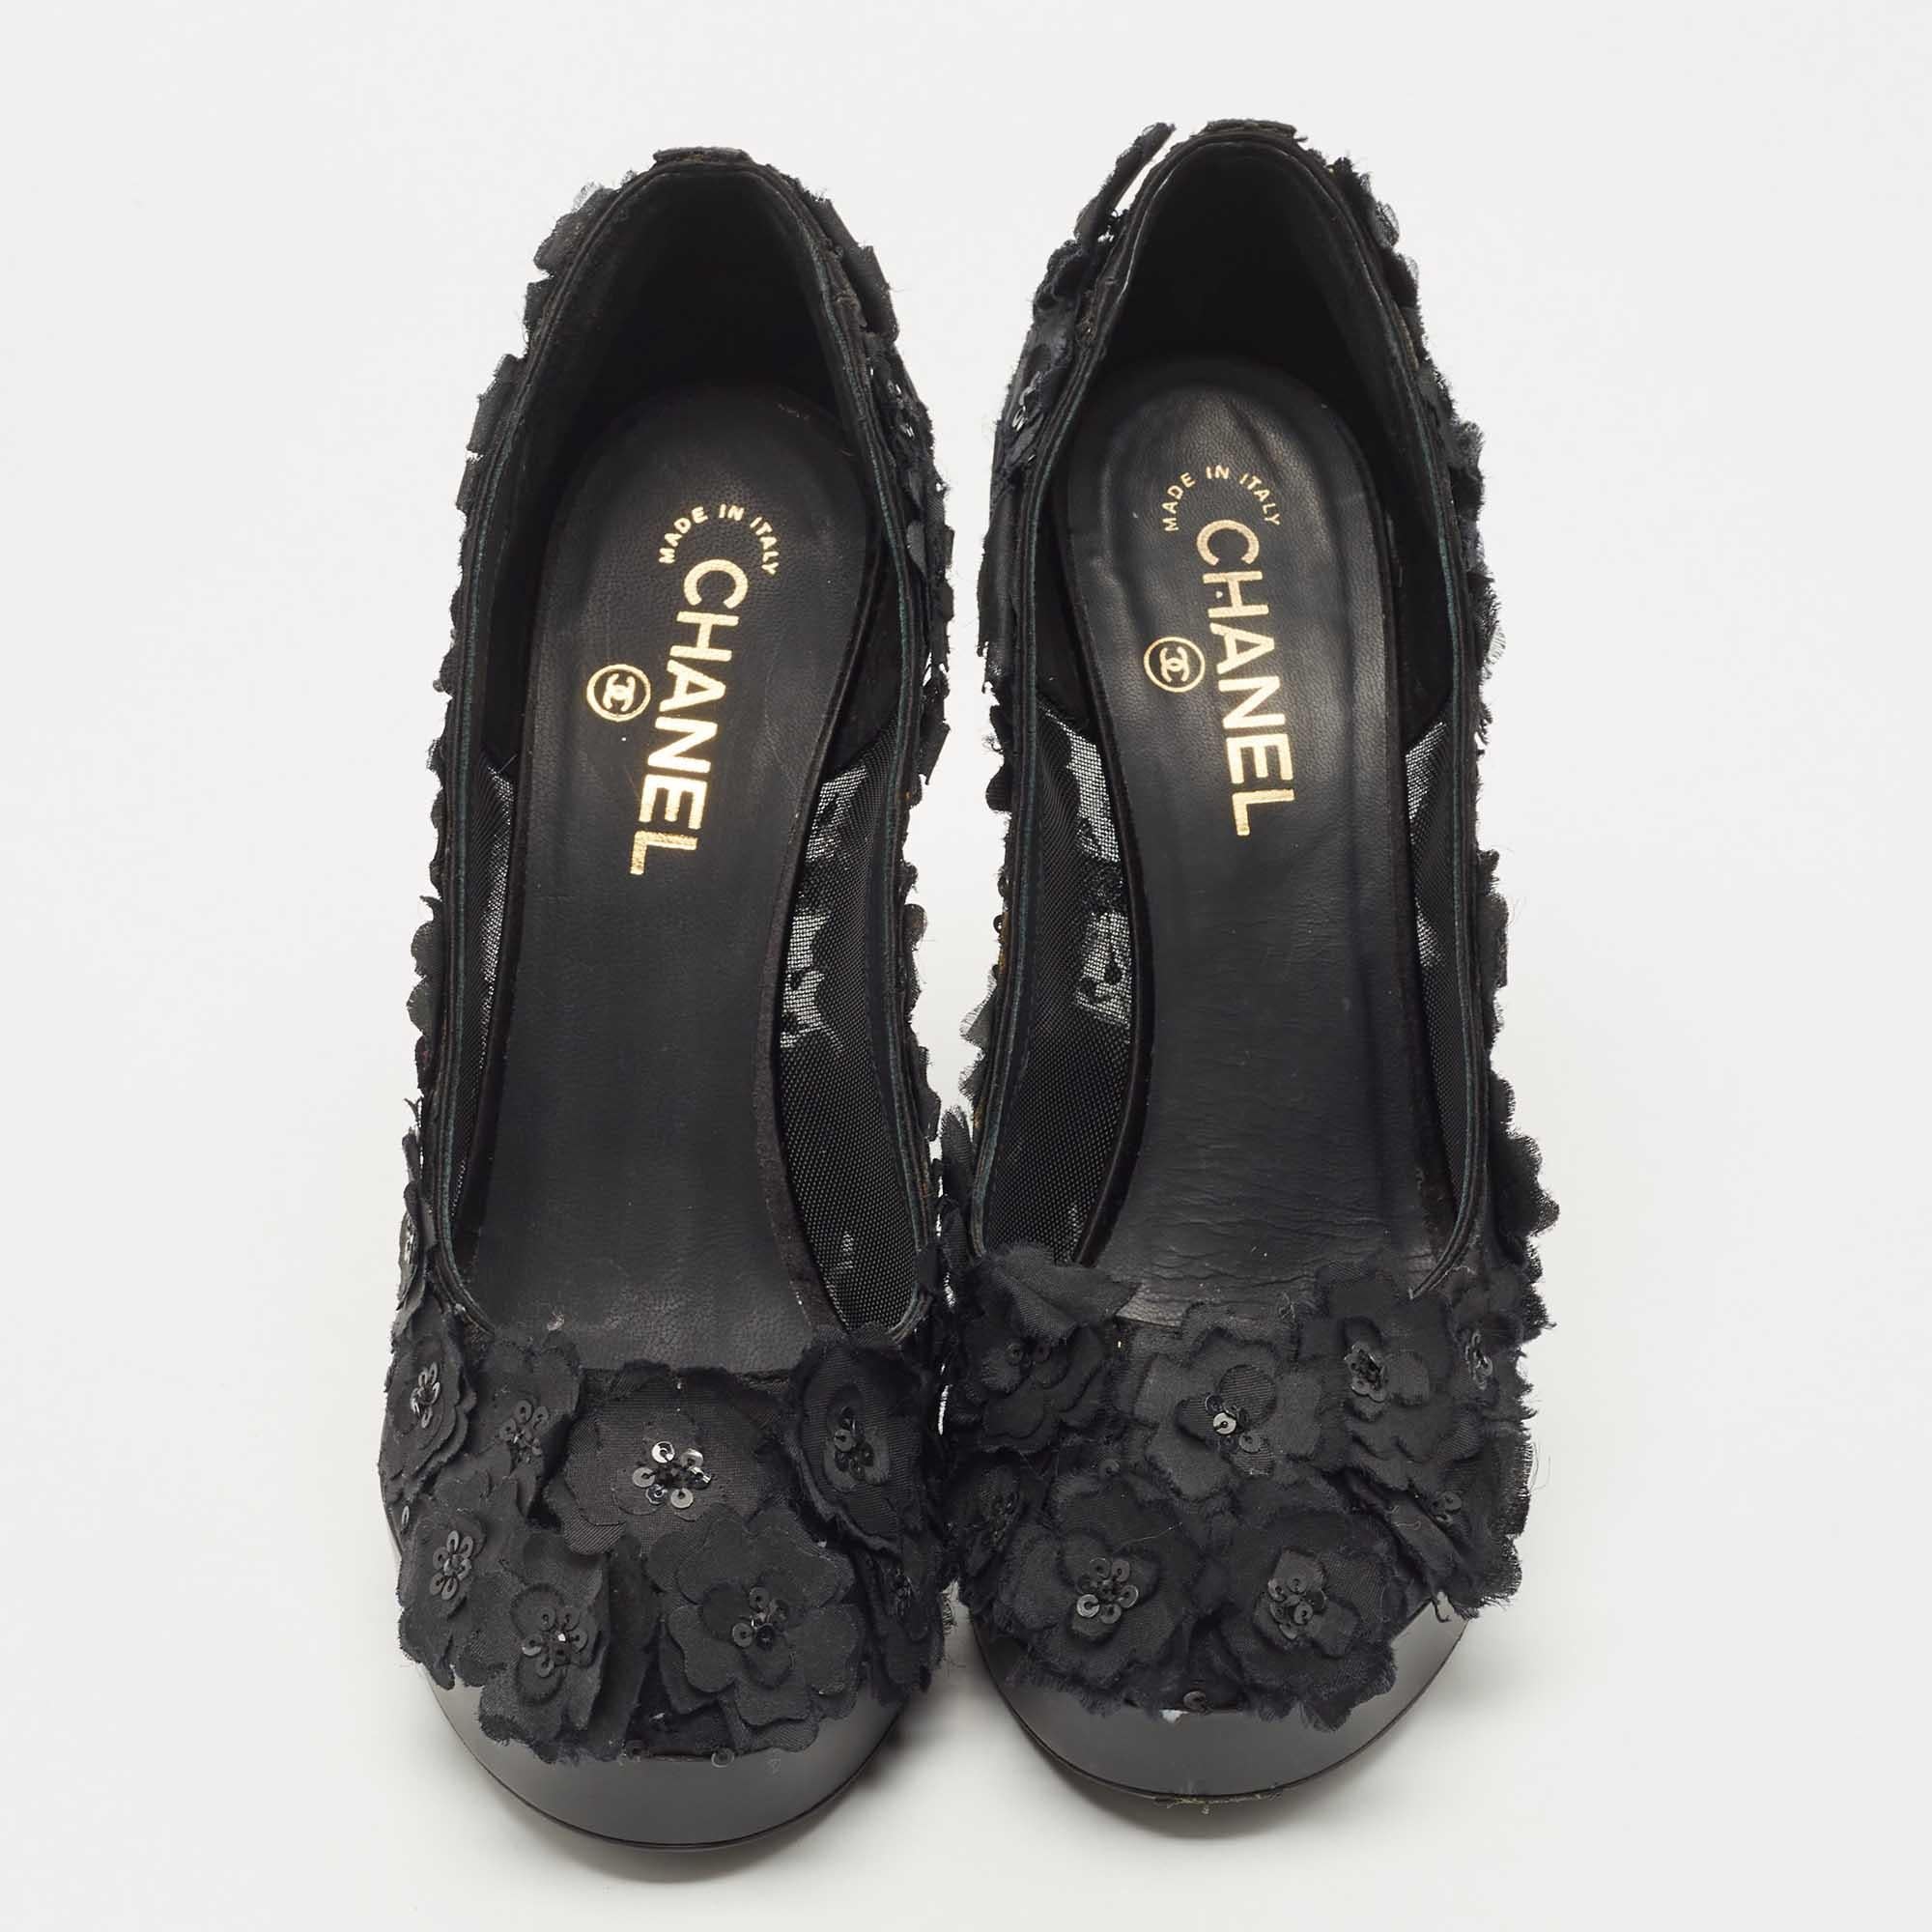 Add an elegant touch to all our attires with this pair of pumps from the House of Chanel. These shoes are designed using black fabric, with Camellia motif elevating their beauty. Wear these sandals with your outfit to obtain a classy, casual